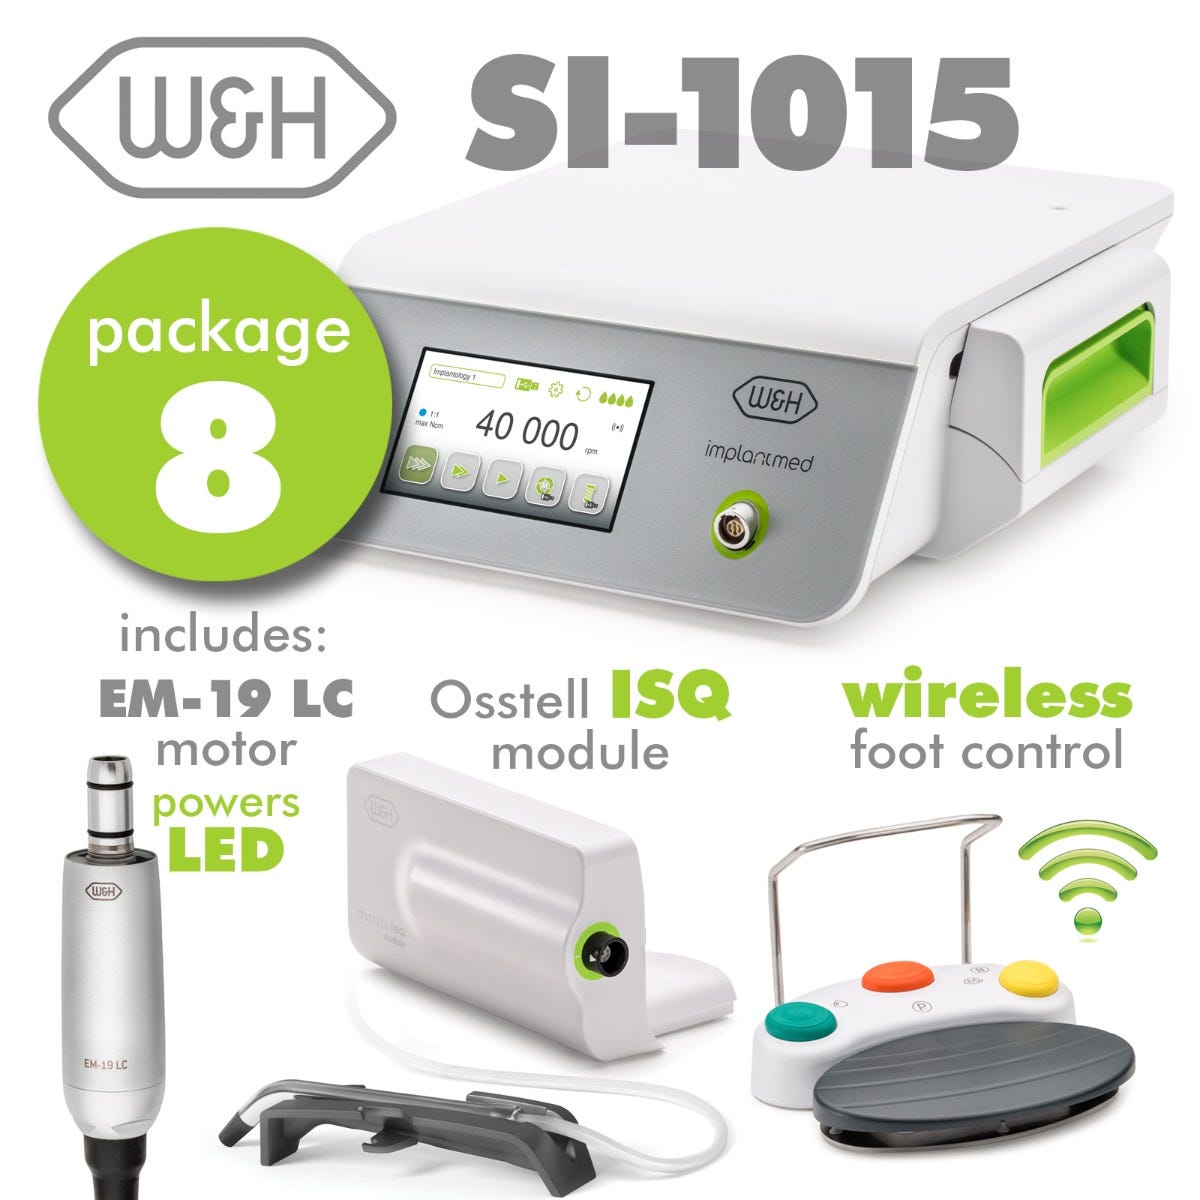 Implantmed Plus Set 8-  Includes: SI-1015 Control Unit, EM-19LC Motor, Wifi Wireless Foot Control, Osstell Module